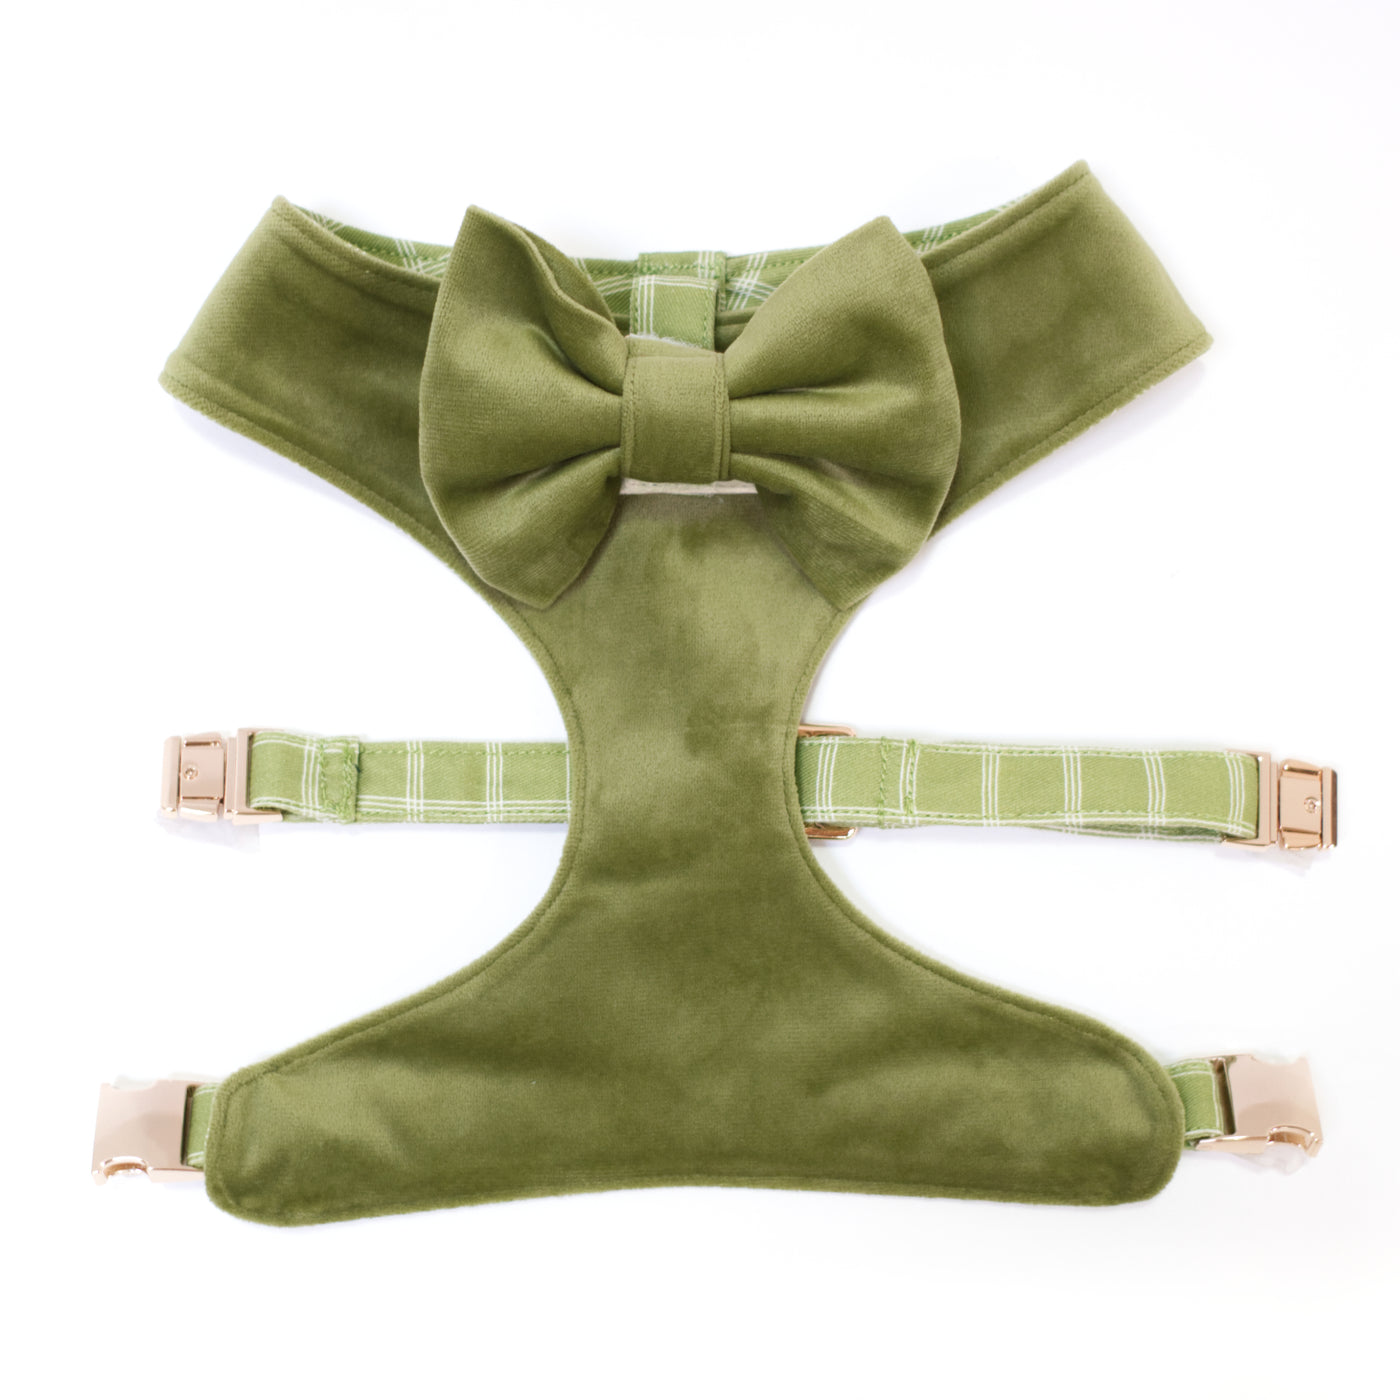 Olive green velvet reversible dog harness with gold hardware and removable bow tie